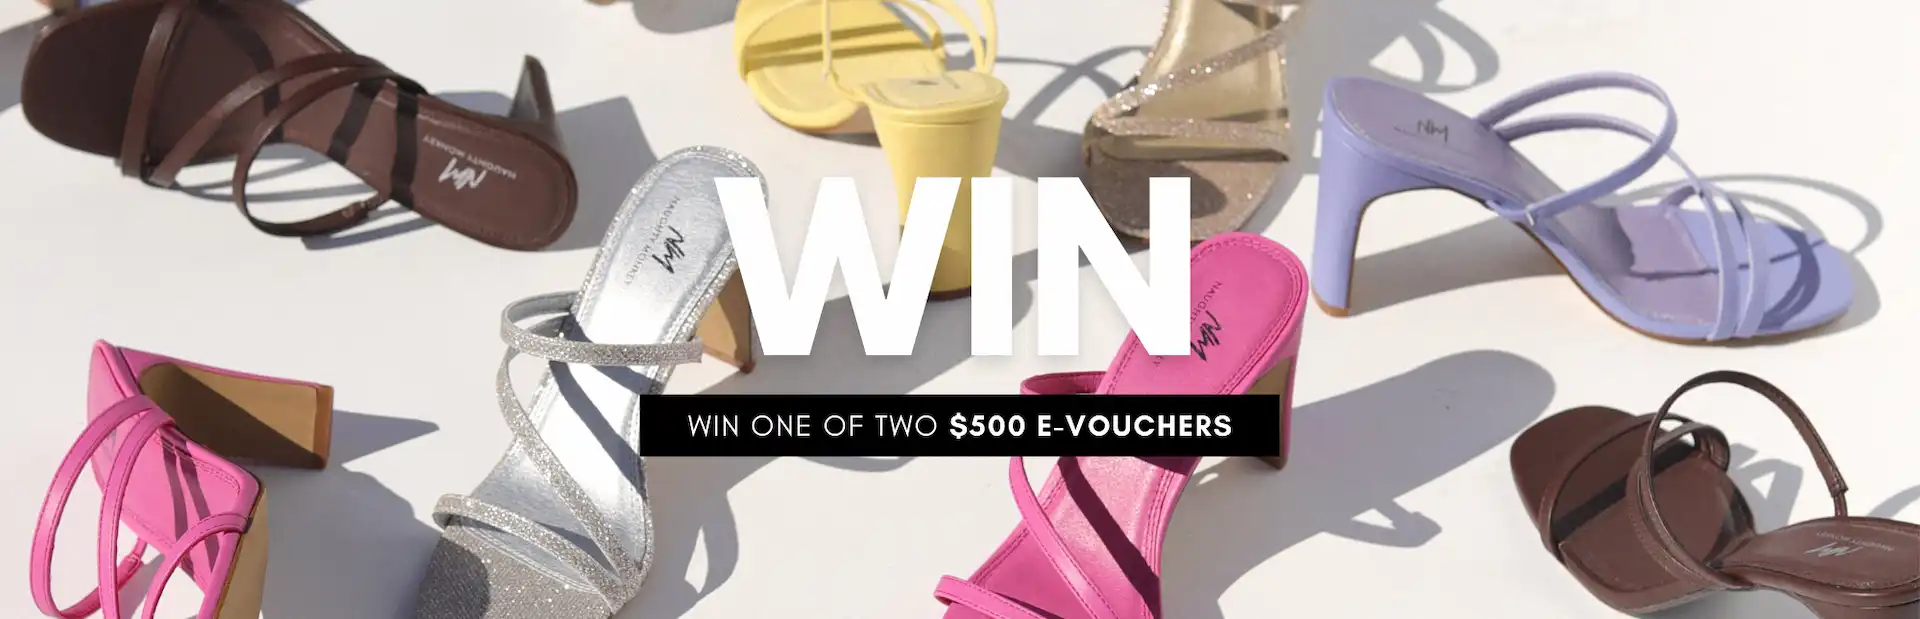 Get a chance to Win one of two $500 e-vouchers by registering at Famous Footwear